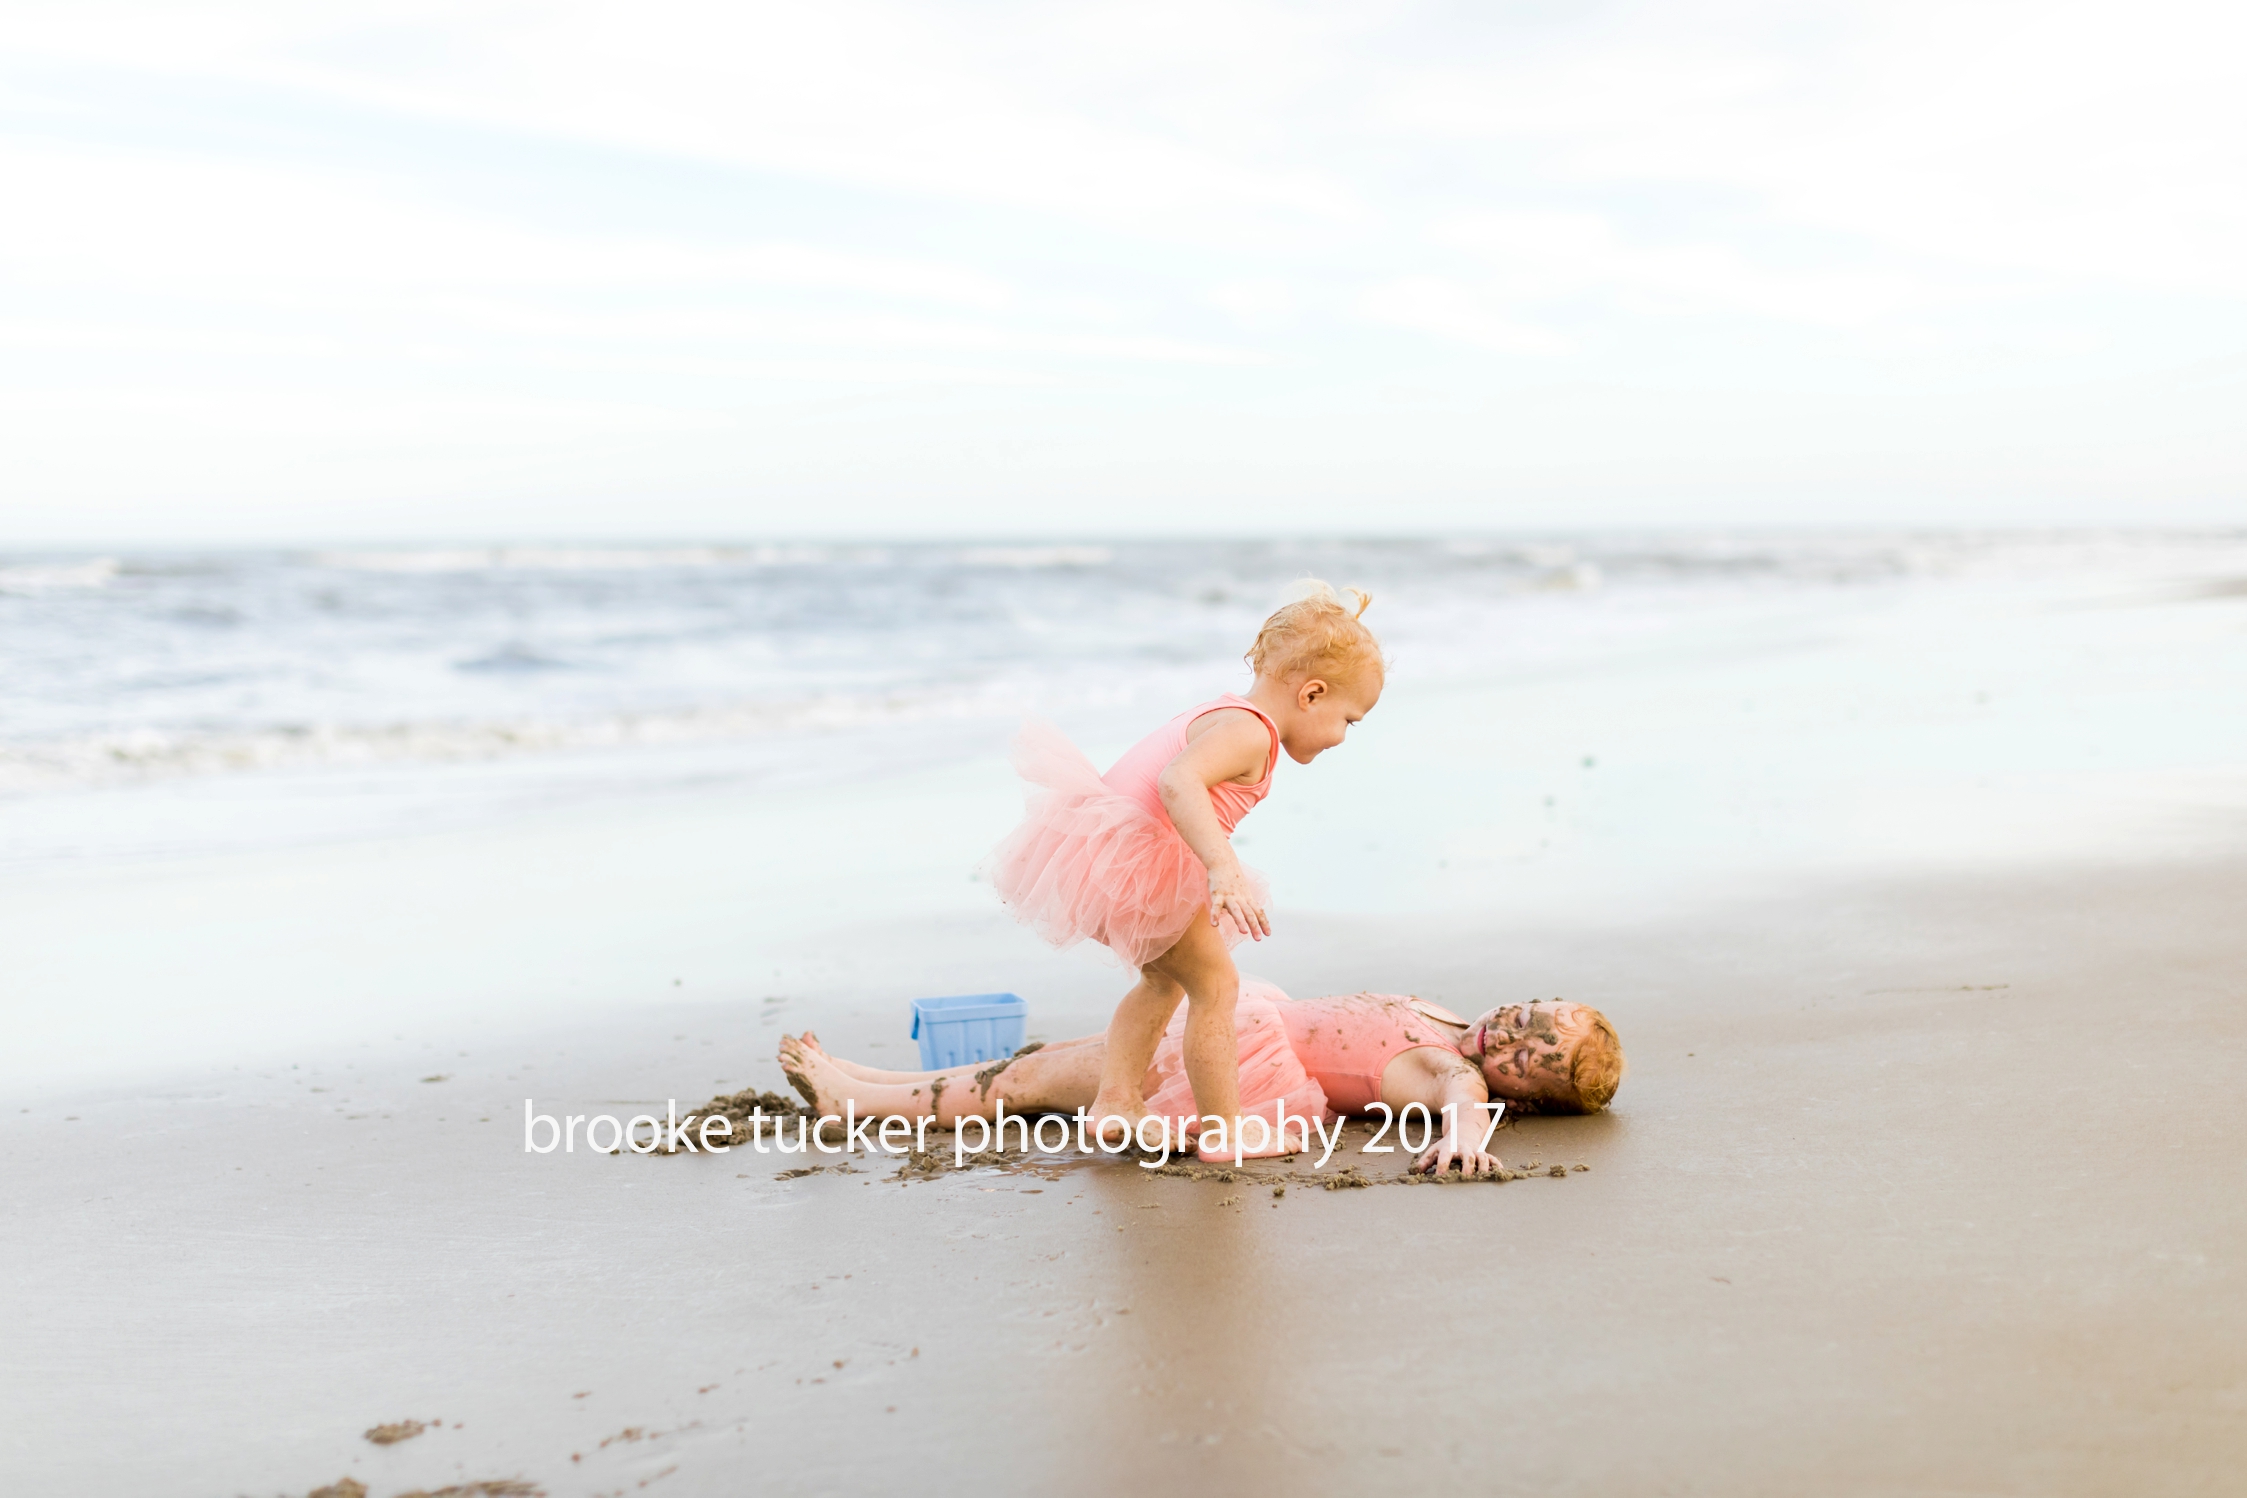 beautiful back bay golden hour children's photography by brooke tucker photographer